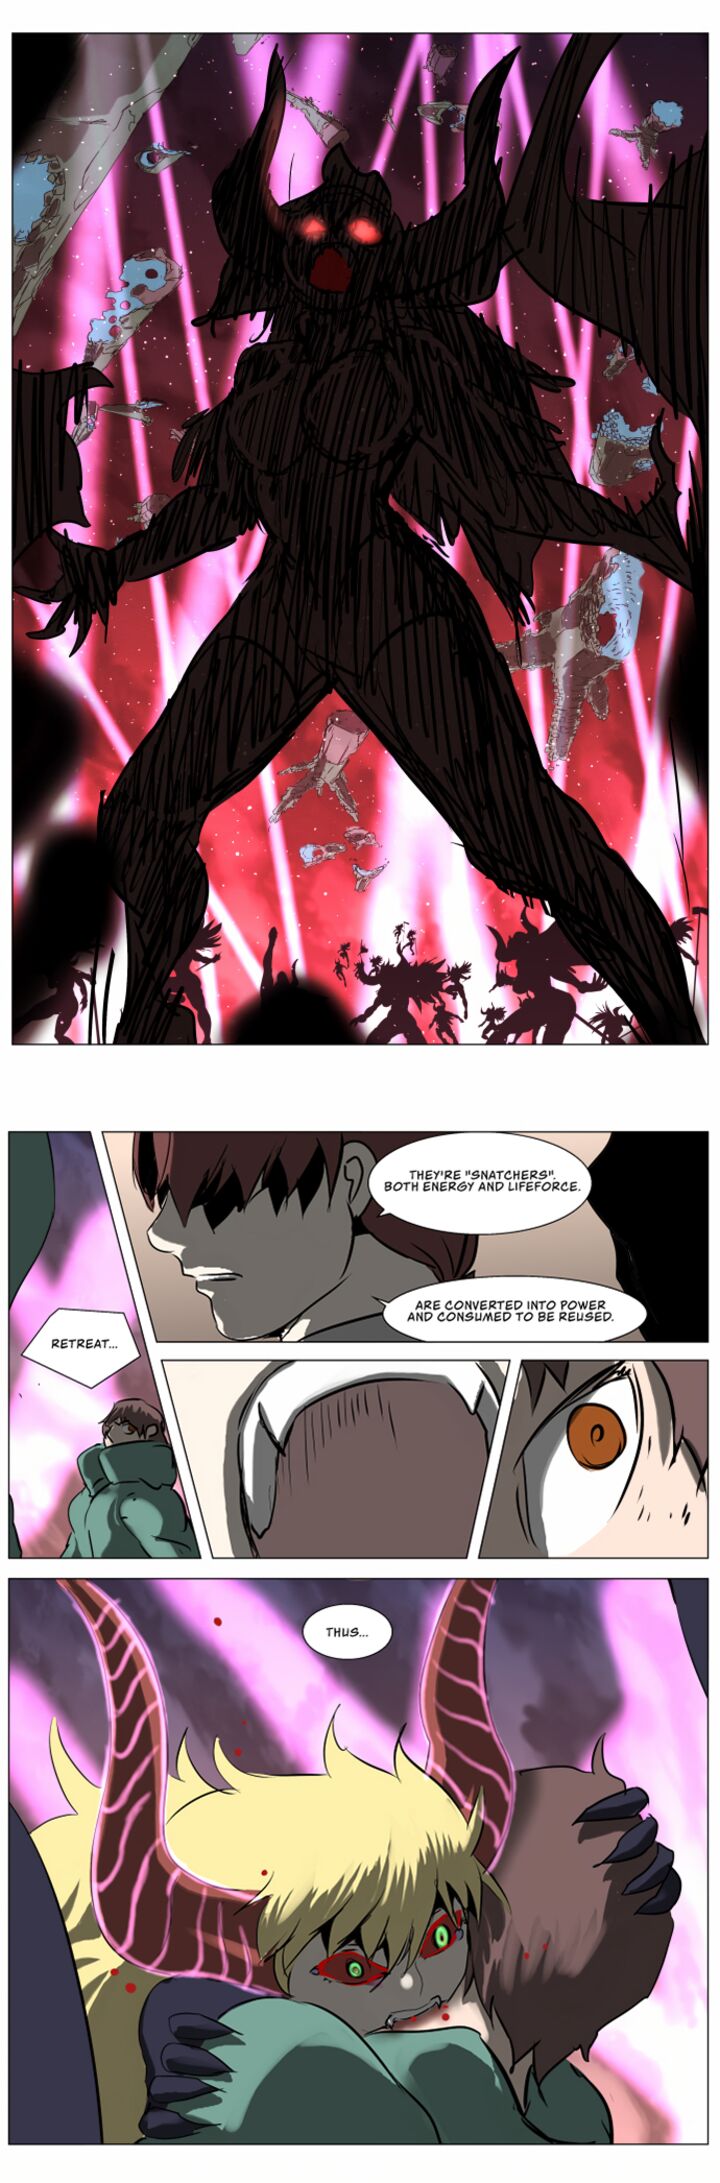 Knight Run Chapter 245 Page 2